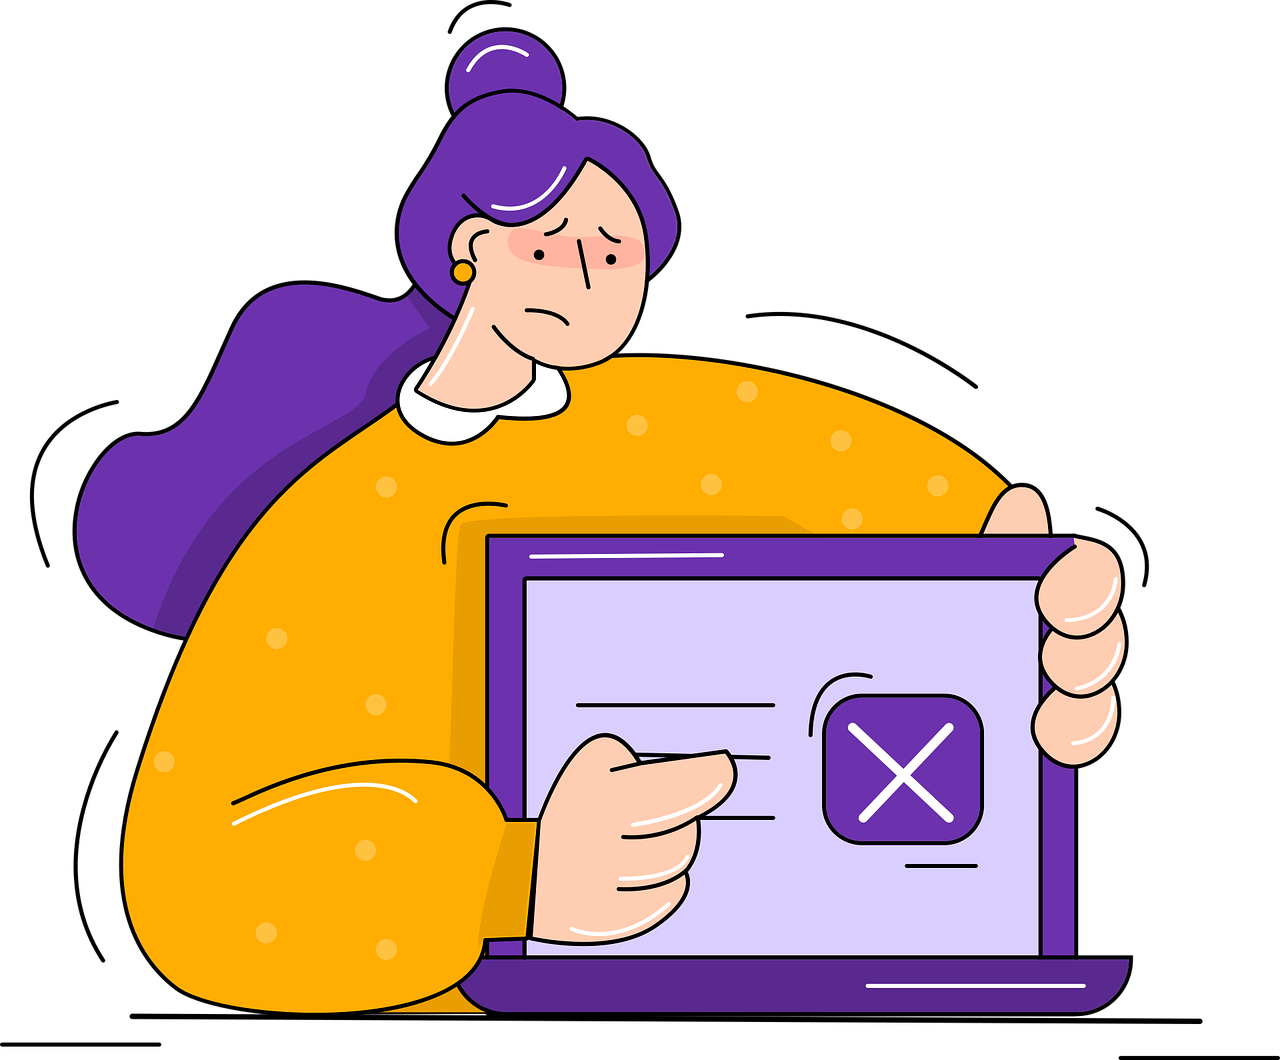 a person that is sitting down with a laptop, an illustration of, pexels, computer art, woman his holding a sign, violet colored theme, rejected concepts, close up to the screen